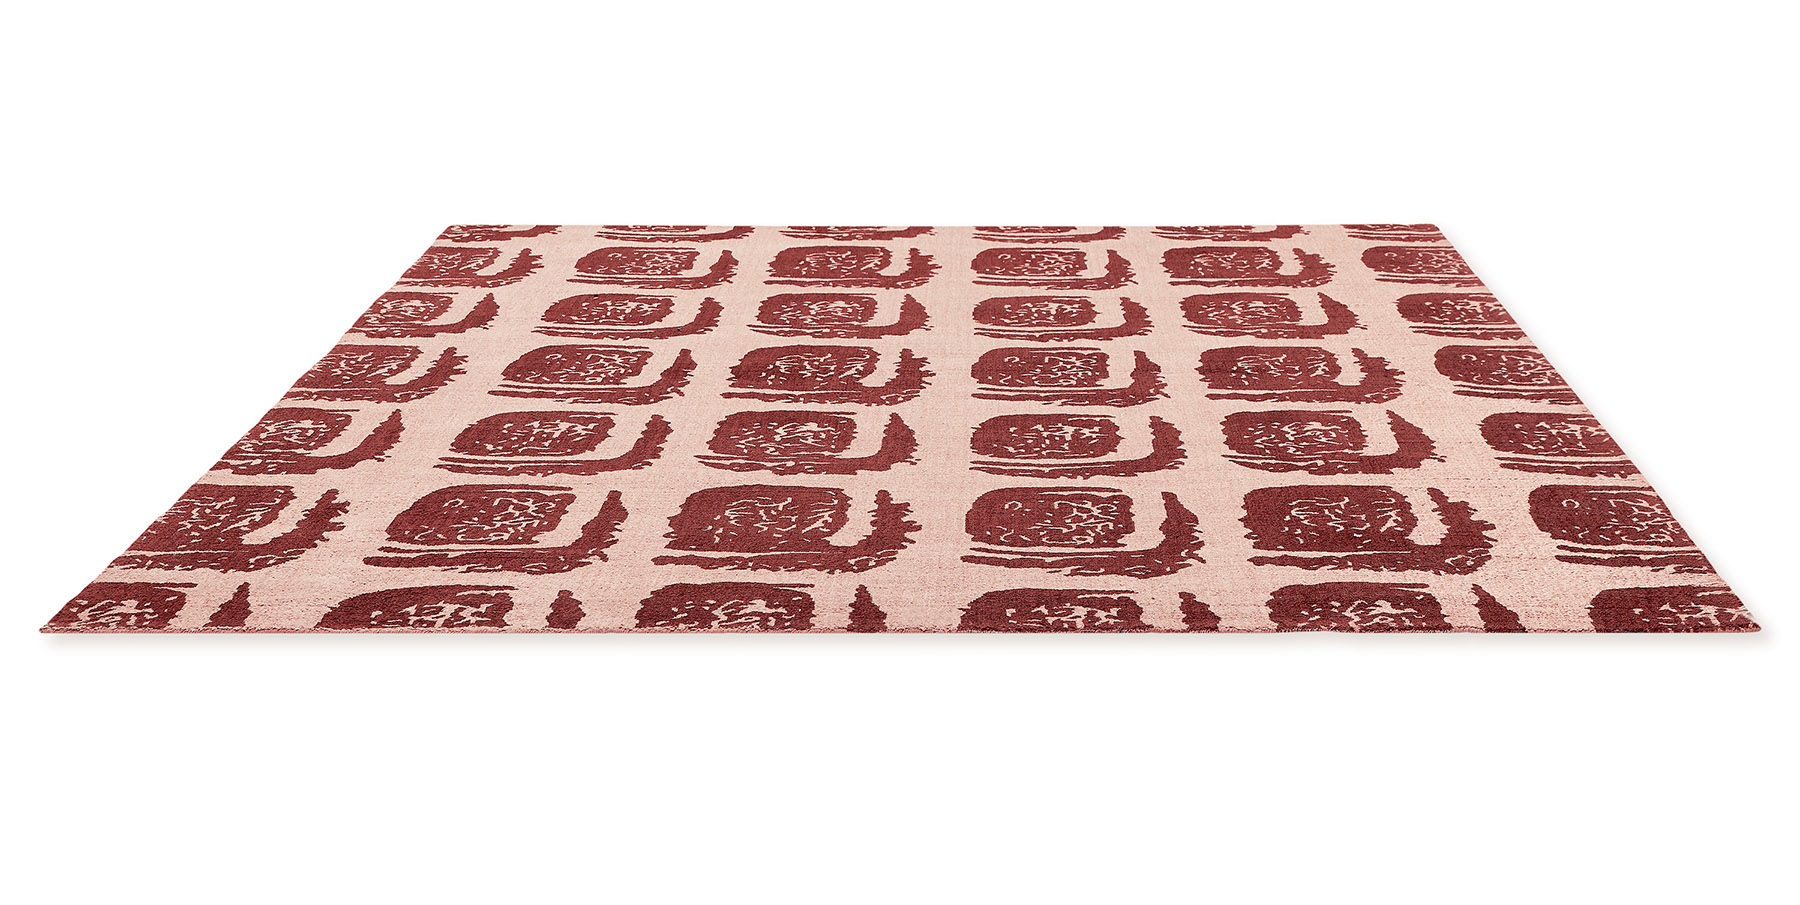 Woodblock Red Rug ☞ Size: 250 x 350 cm